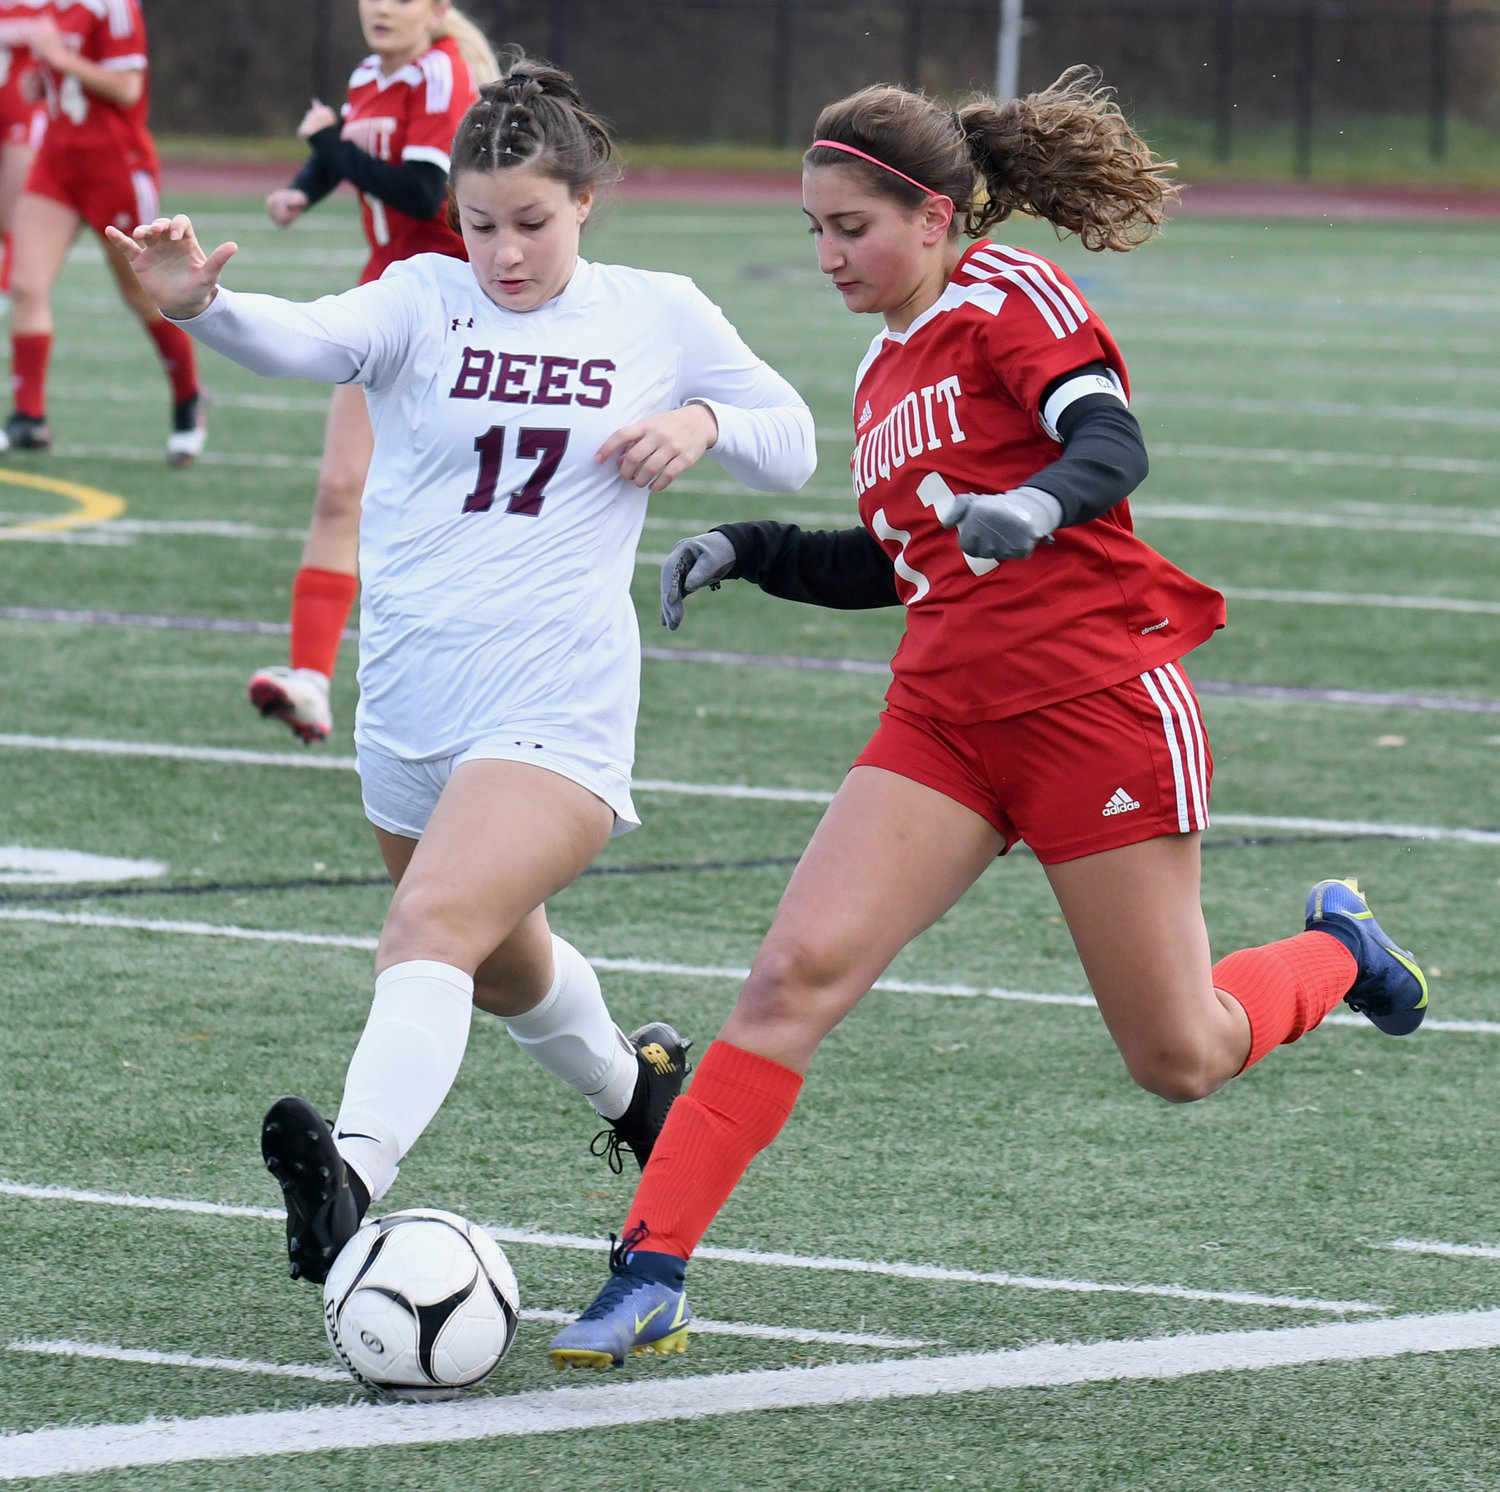 Sauquoit Valley forward Olivia Kalil, right, and Byron-Bergen's Megan Jarkiewicz both make a play for the ball Saturday at Cortland High School in the semifinals of the Class C state playoffs. Kalil scored the game's first goal and Sauquoit won 2-1 to advance to the finals on Sunday.